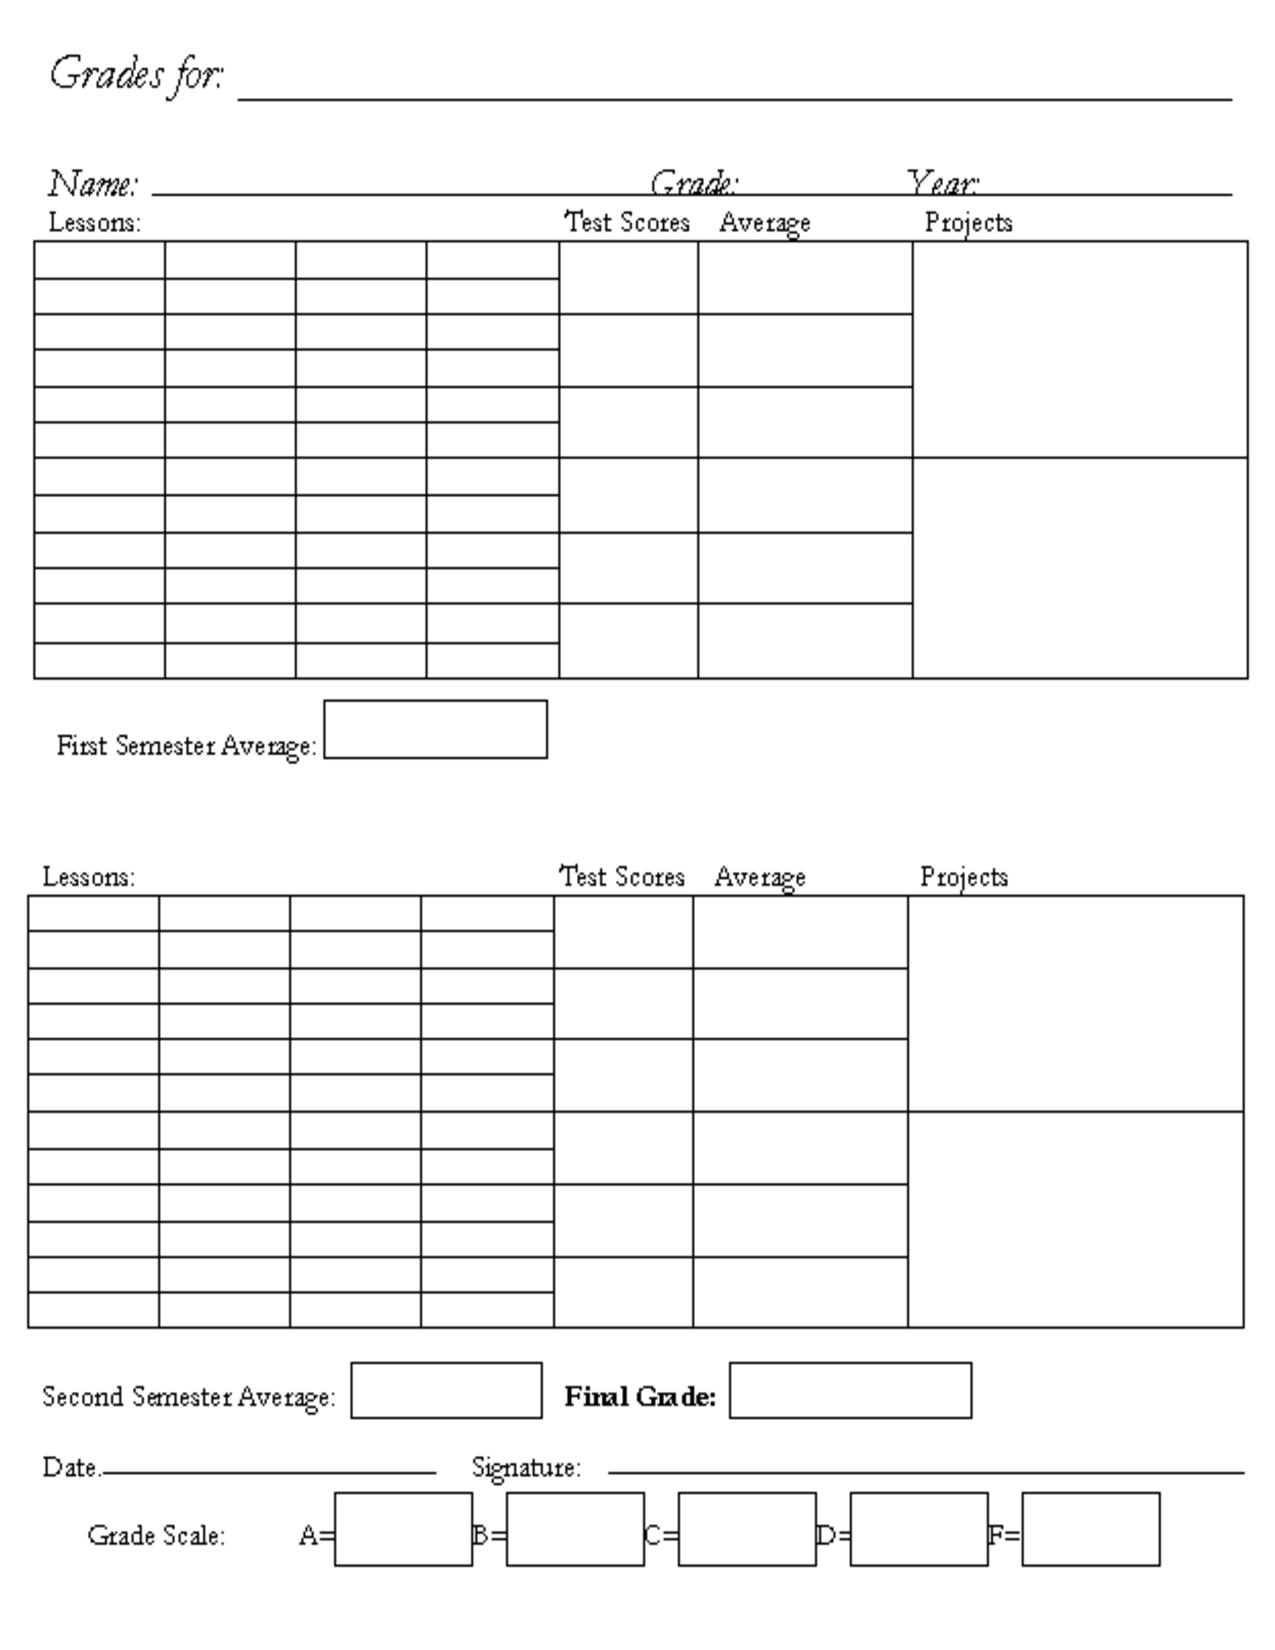 Pinbecky Crossett On Children #10 | Report Card Template Within Result Card Template